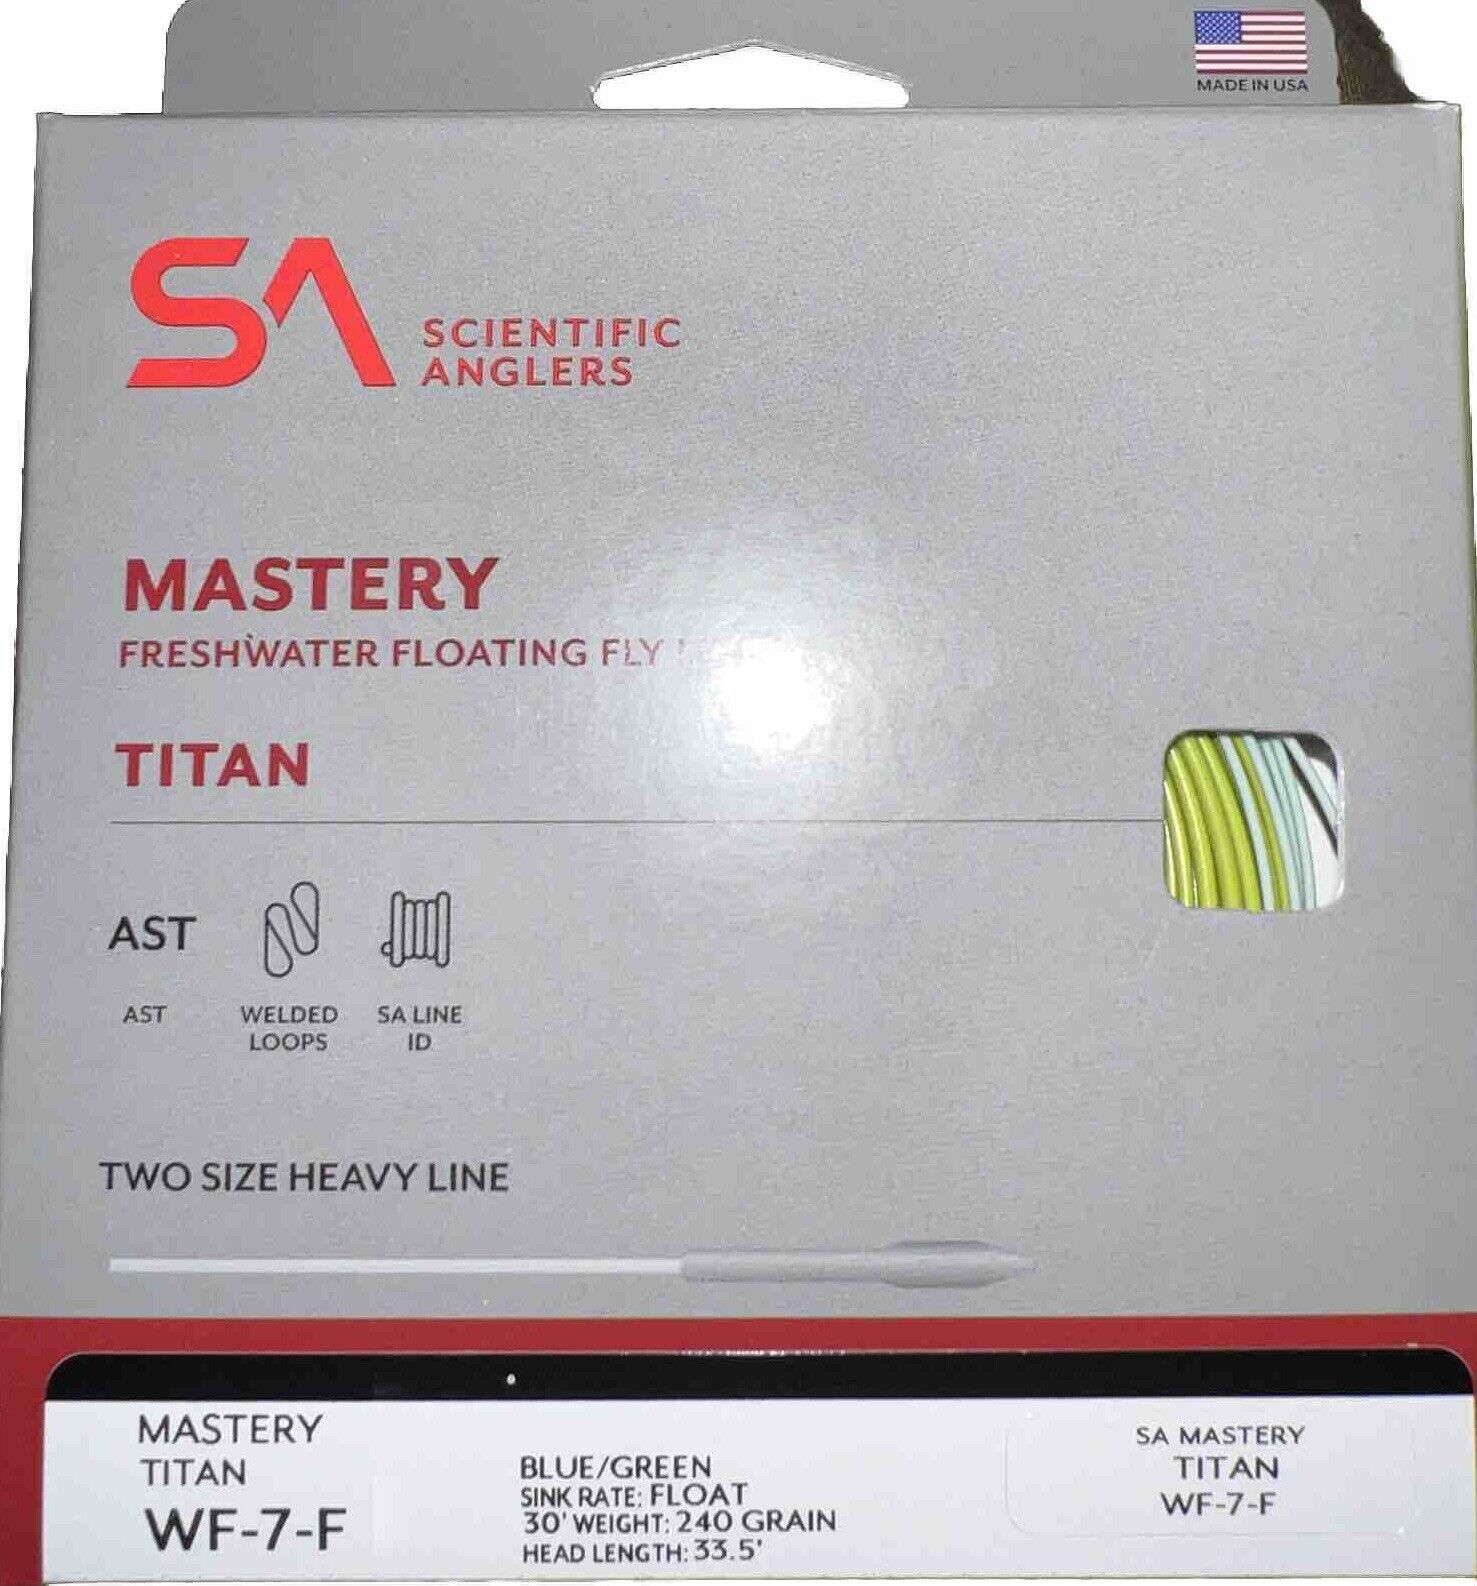 SCIENTIFIC ANGLERS Mastery Titan WF-7-F Blue/Green Fly Line (120920)